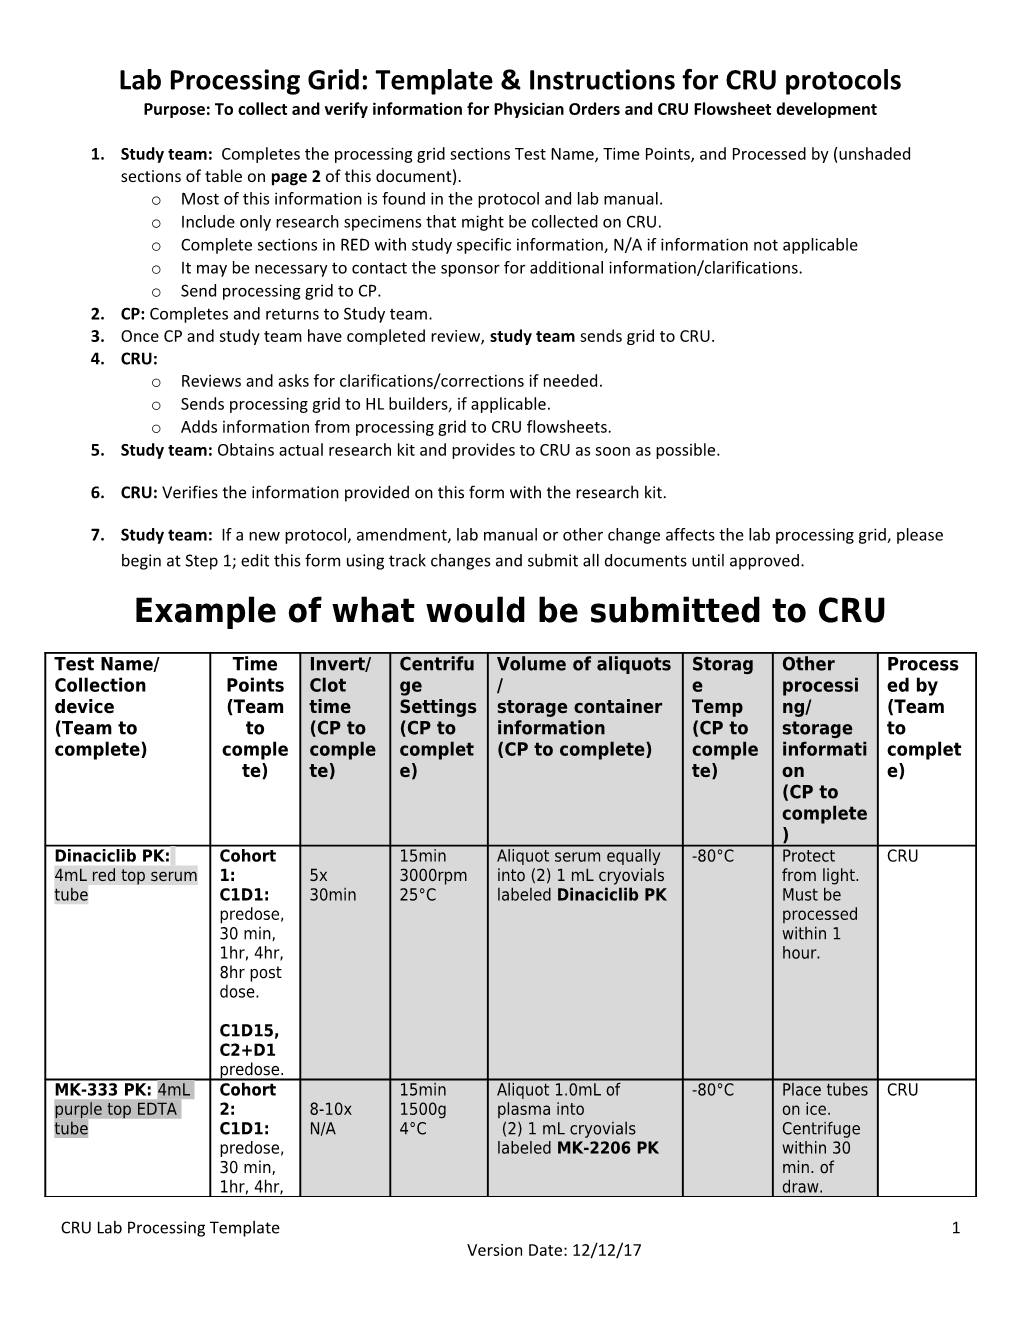 Lab Processing Grid: Template & Instructions for CRU Protocols